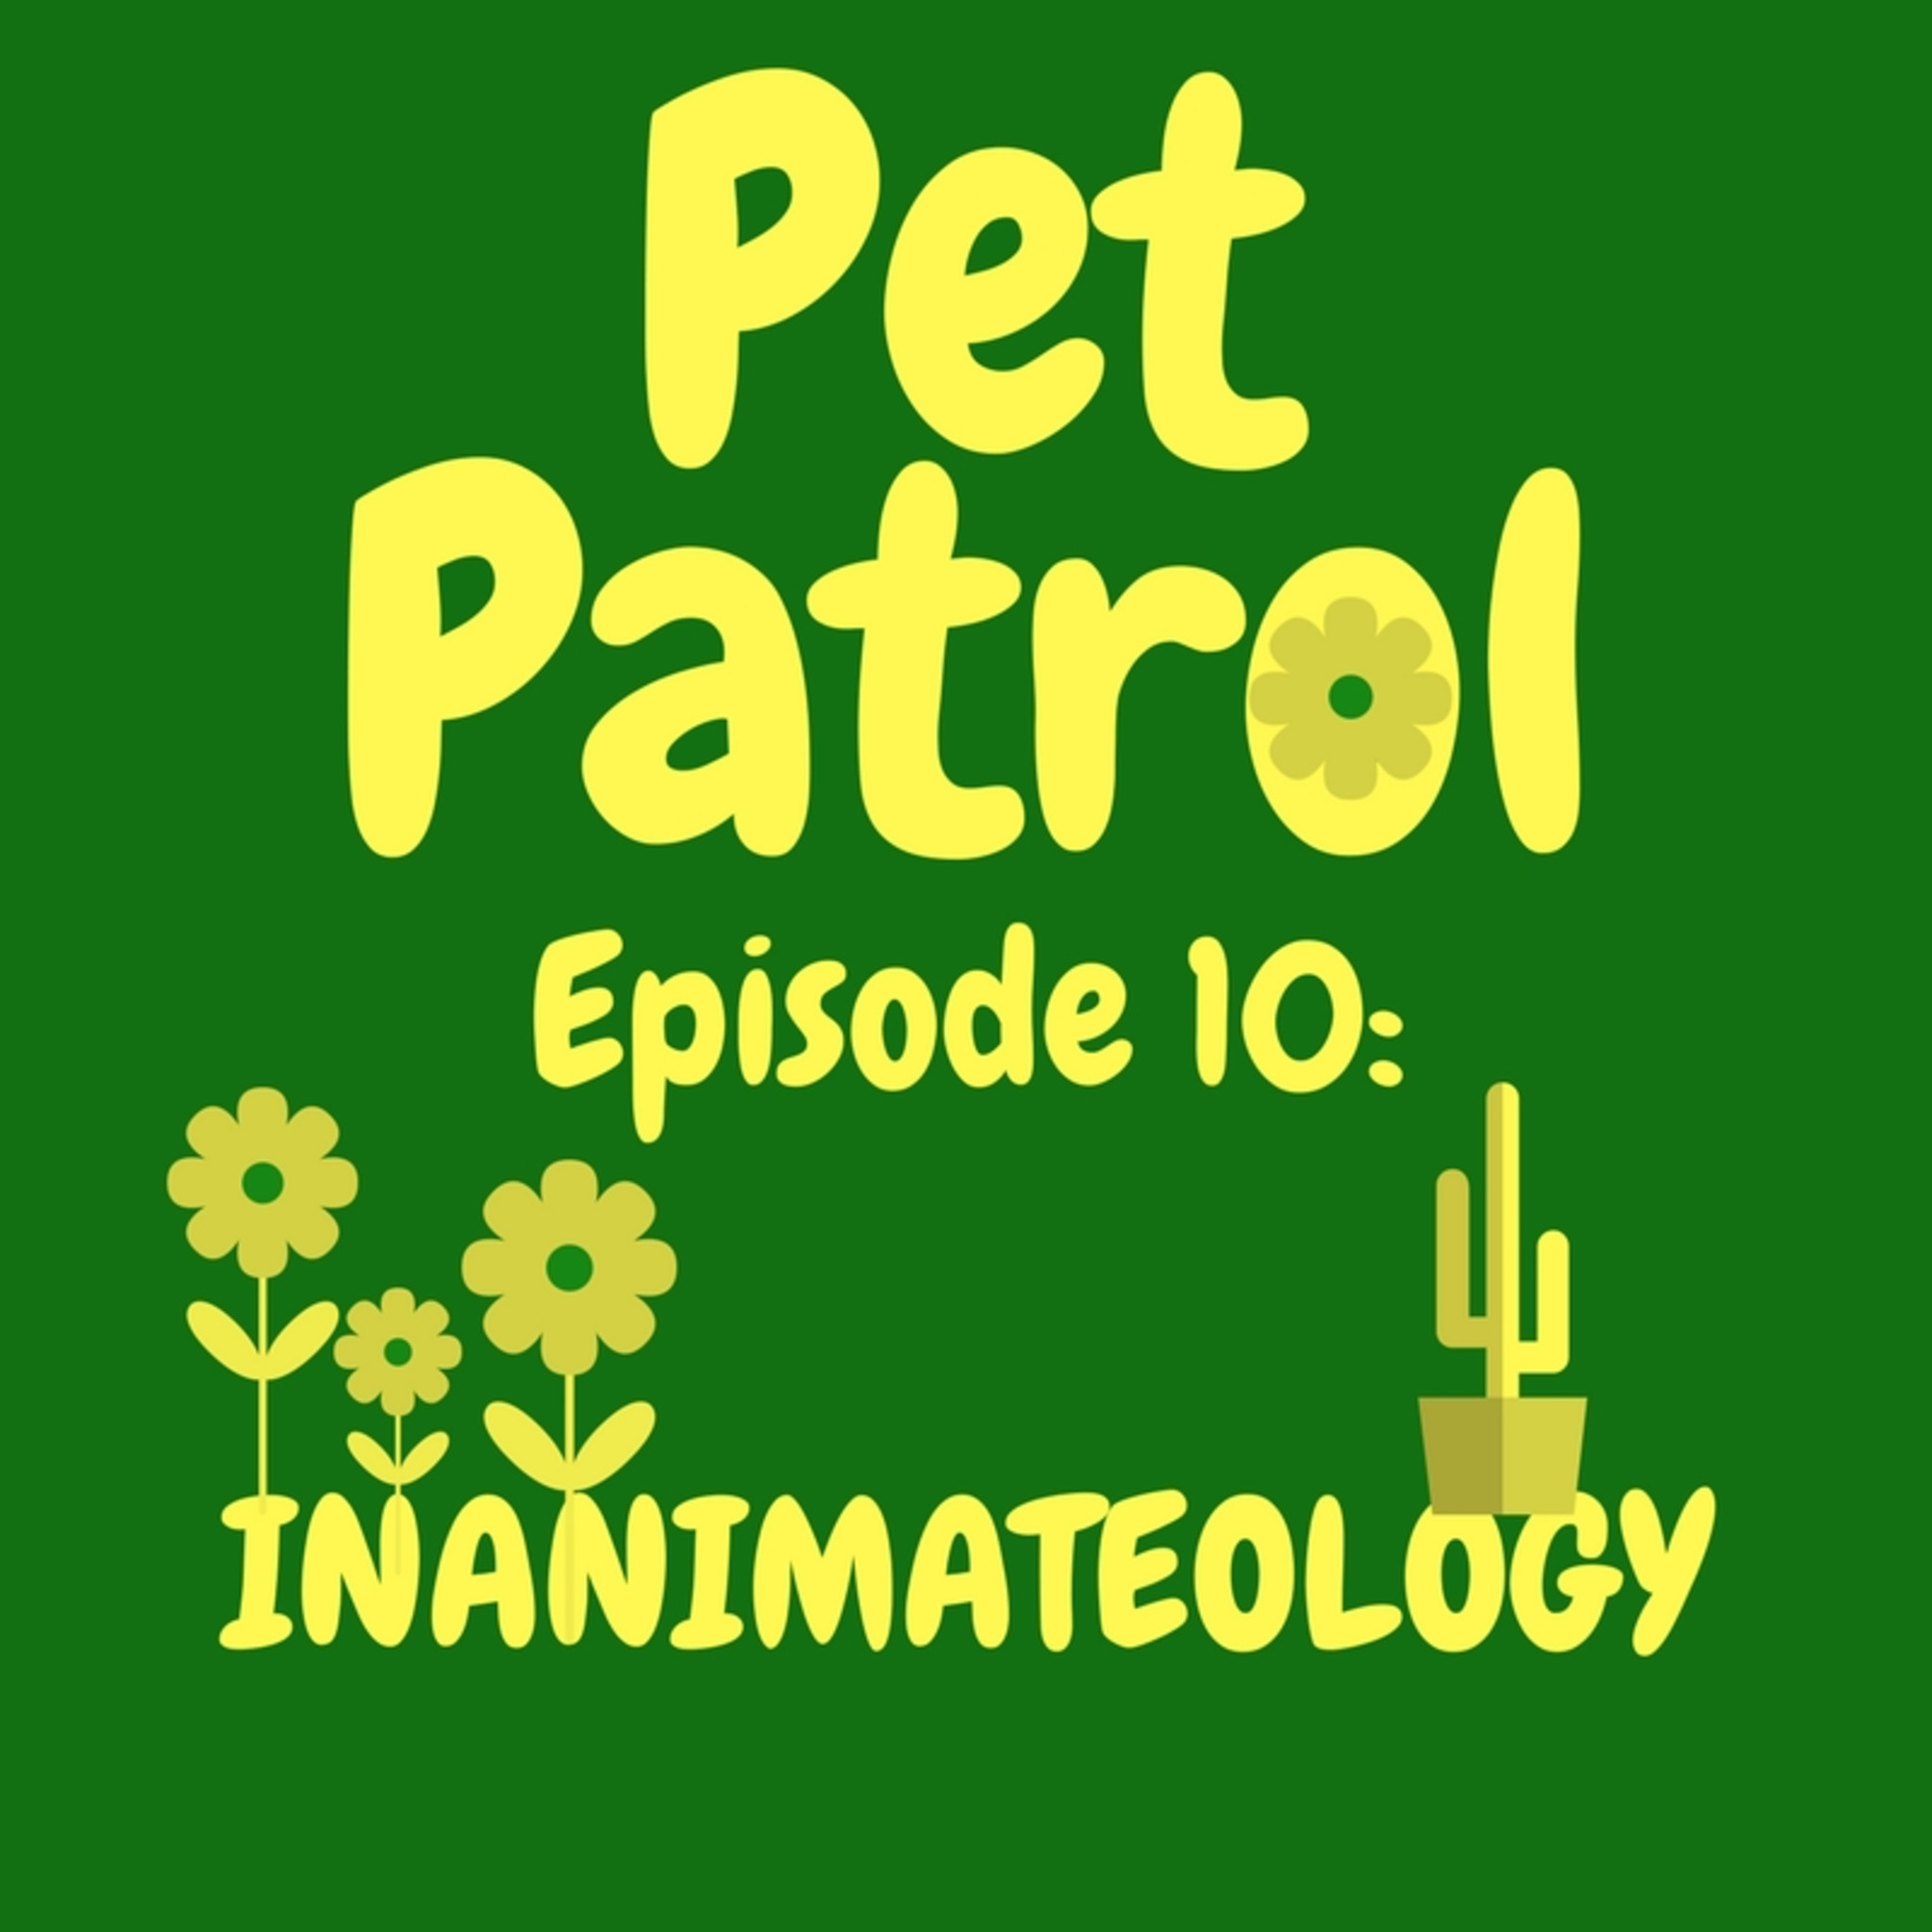 Inanimateology - Hypopetical - What if your inanimate pet came to life?